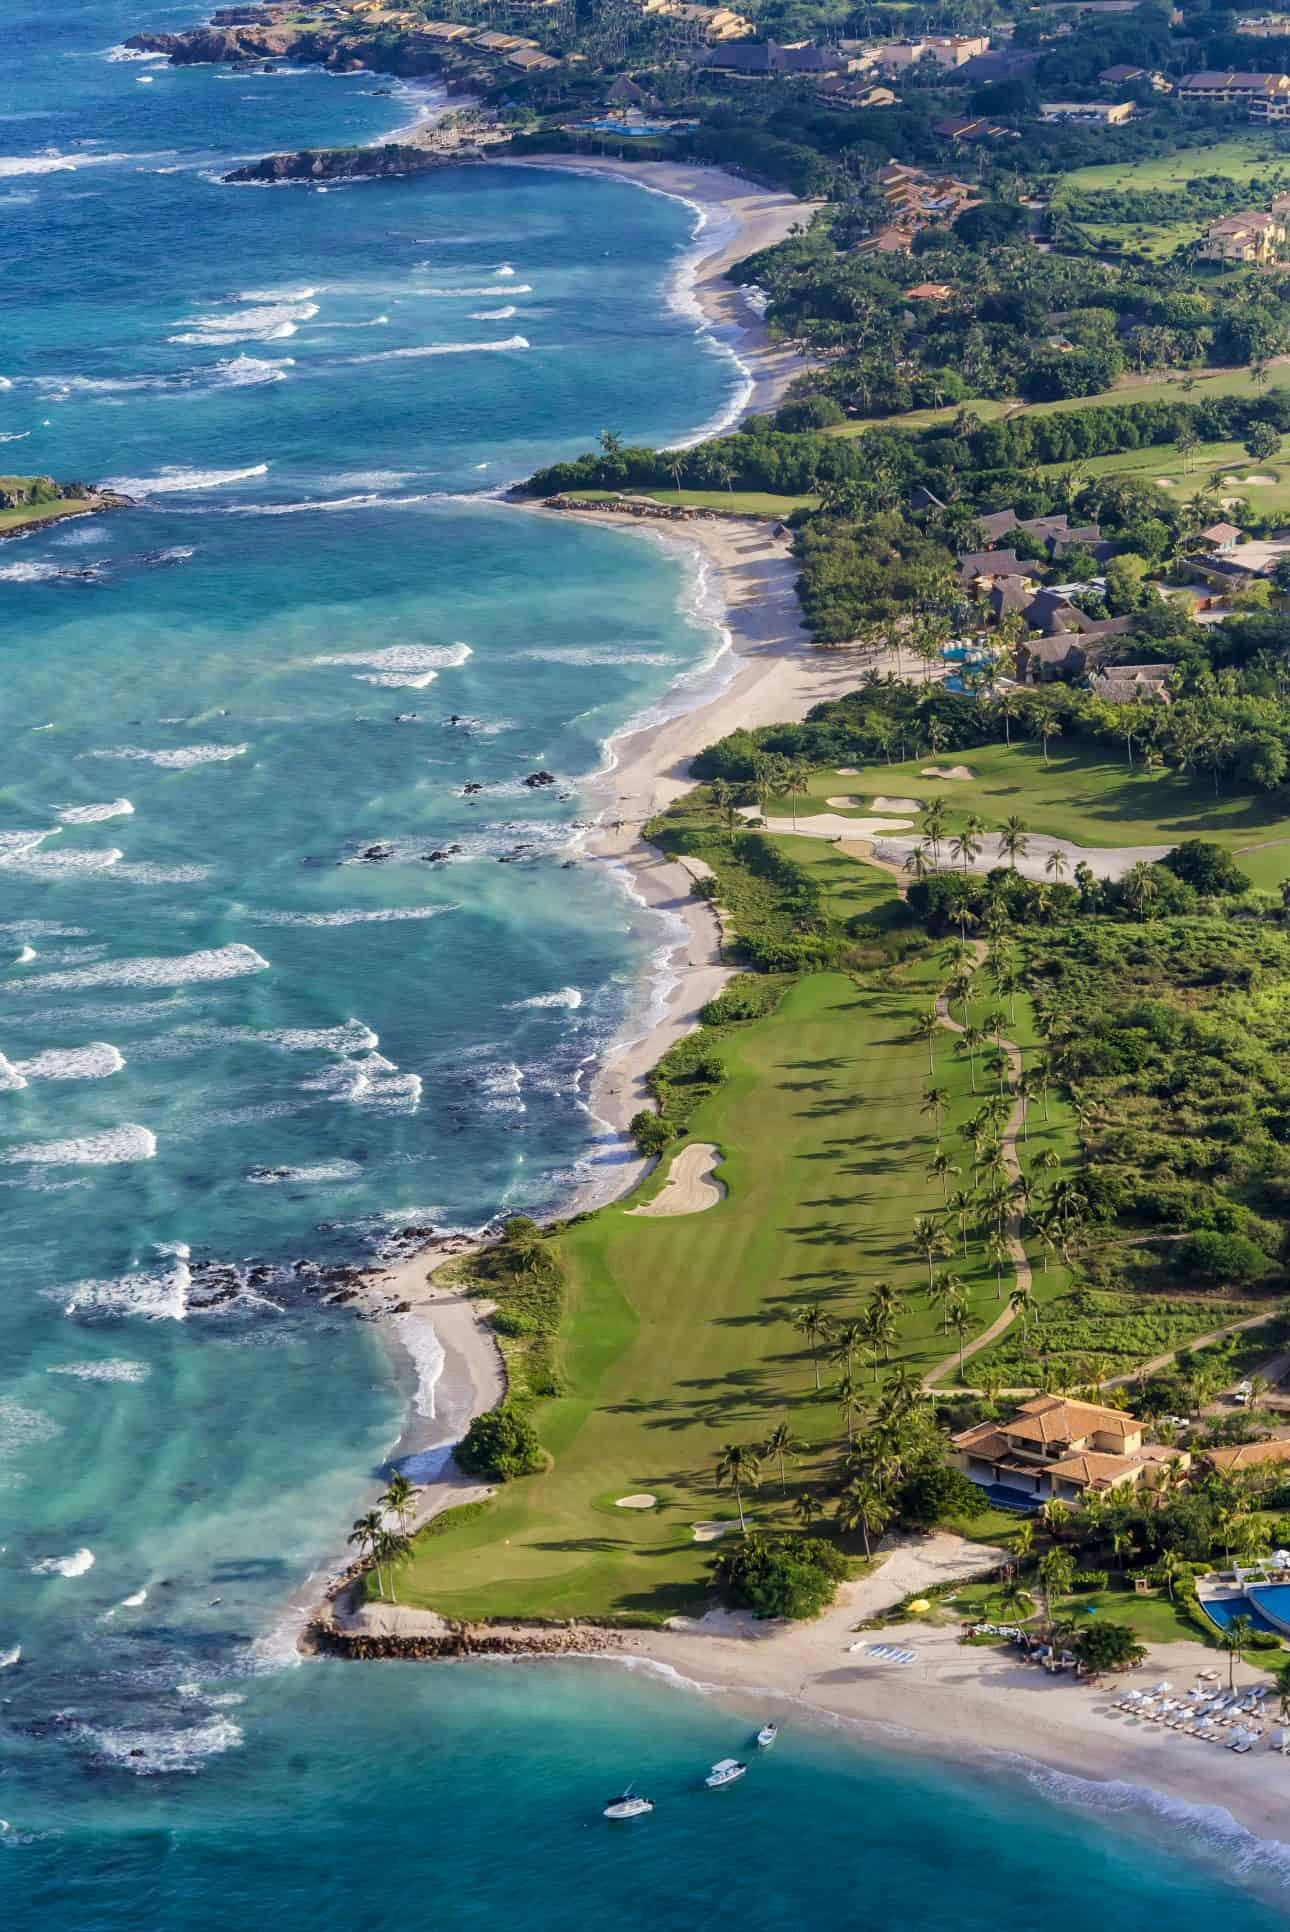 A beach escape like no other: Discovering the allure of Punta Mita